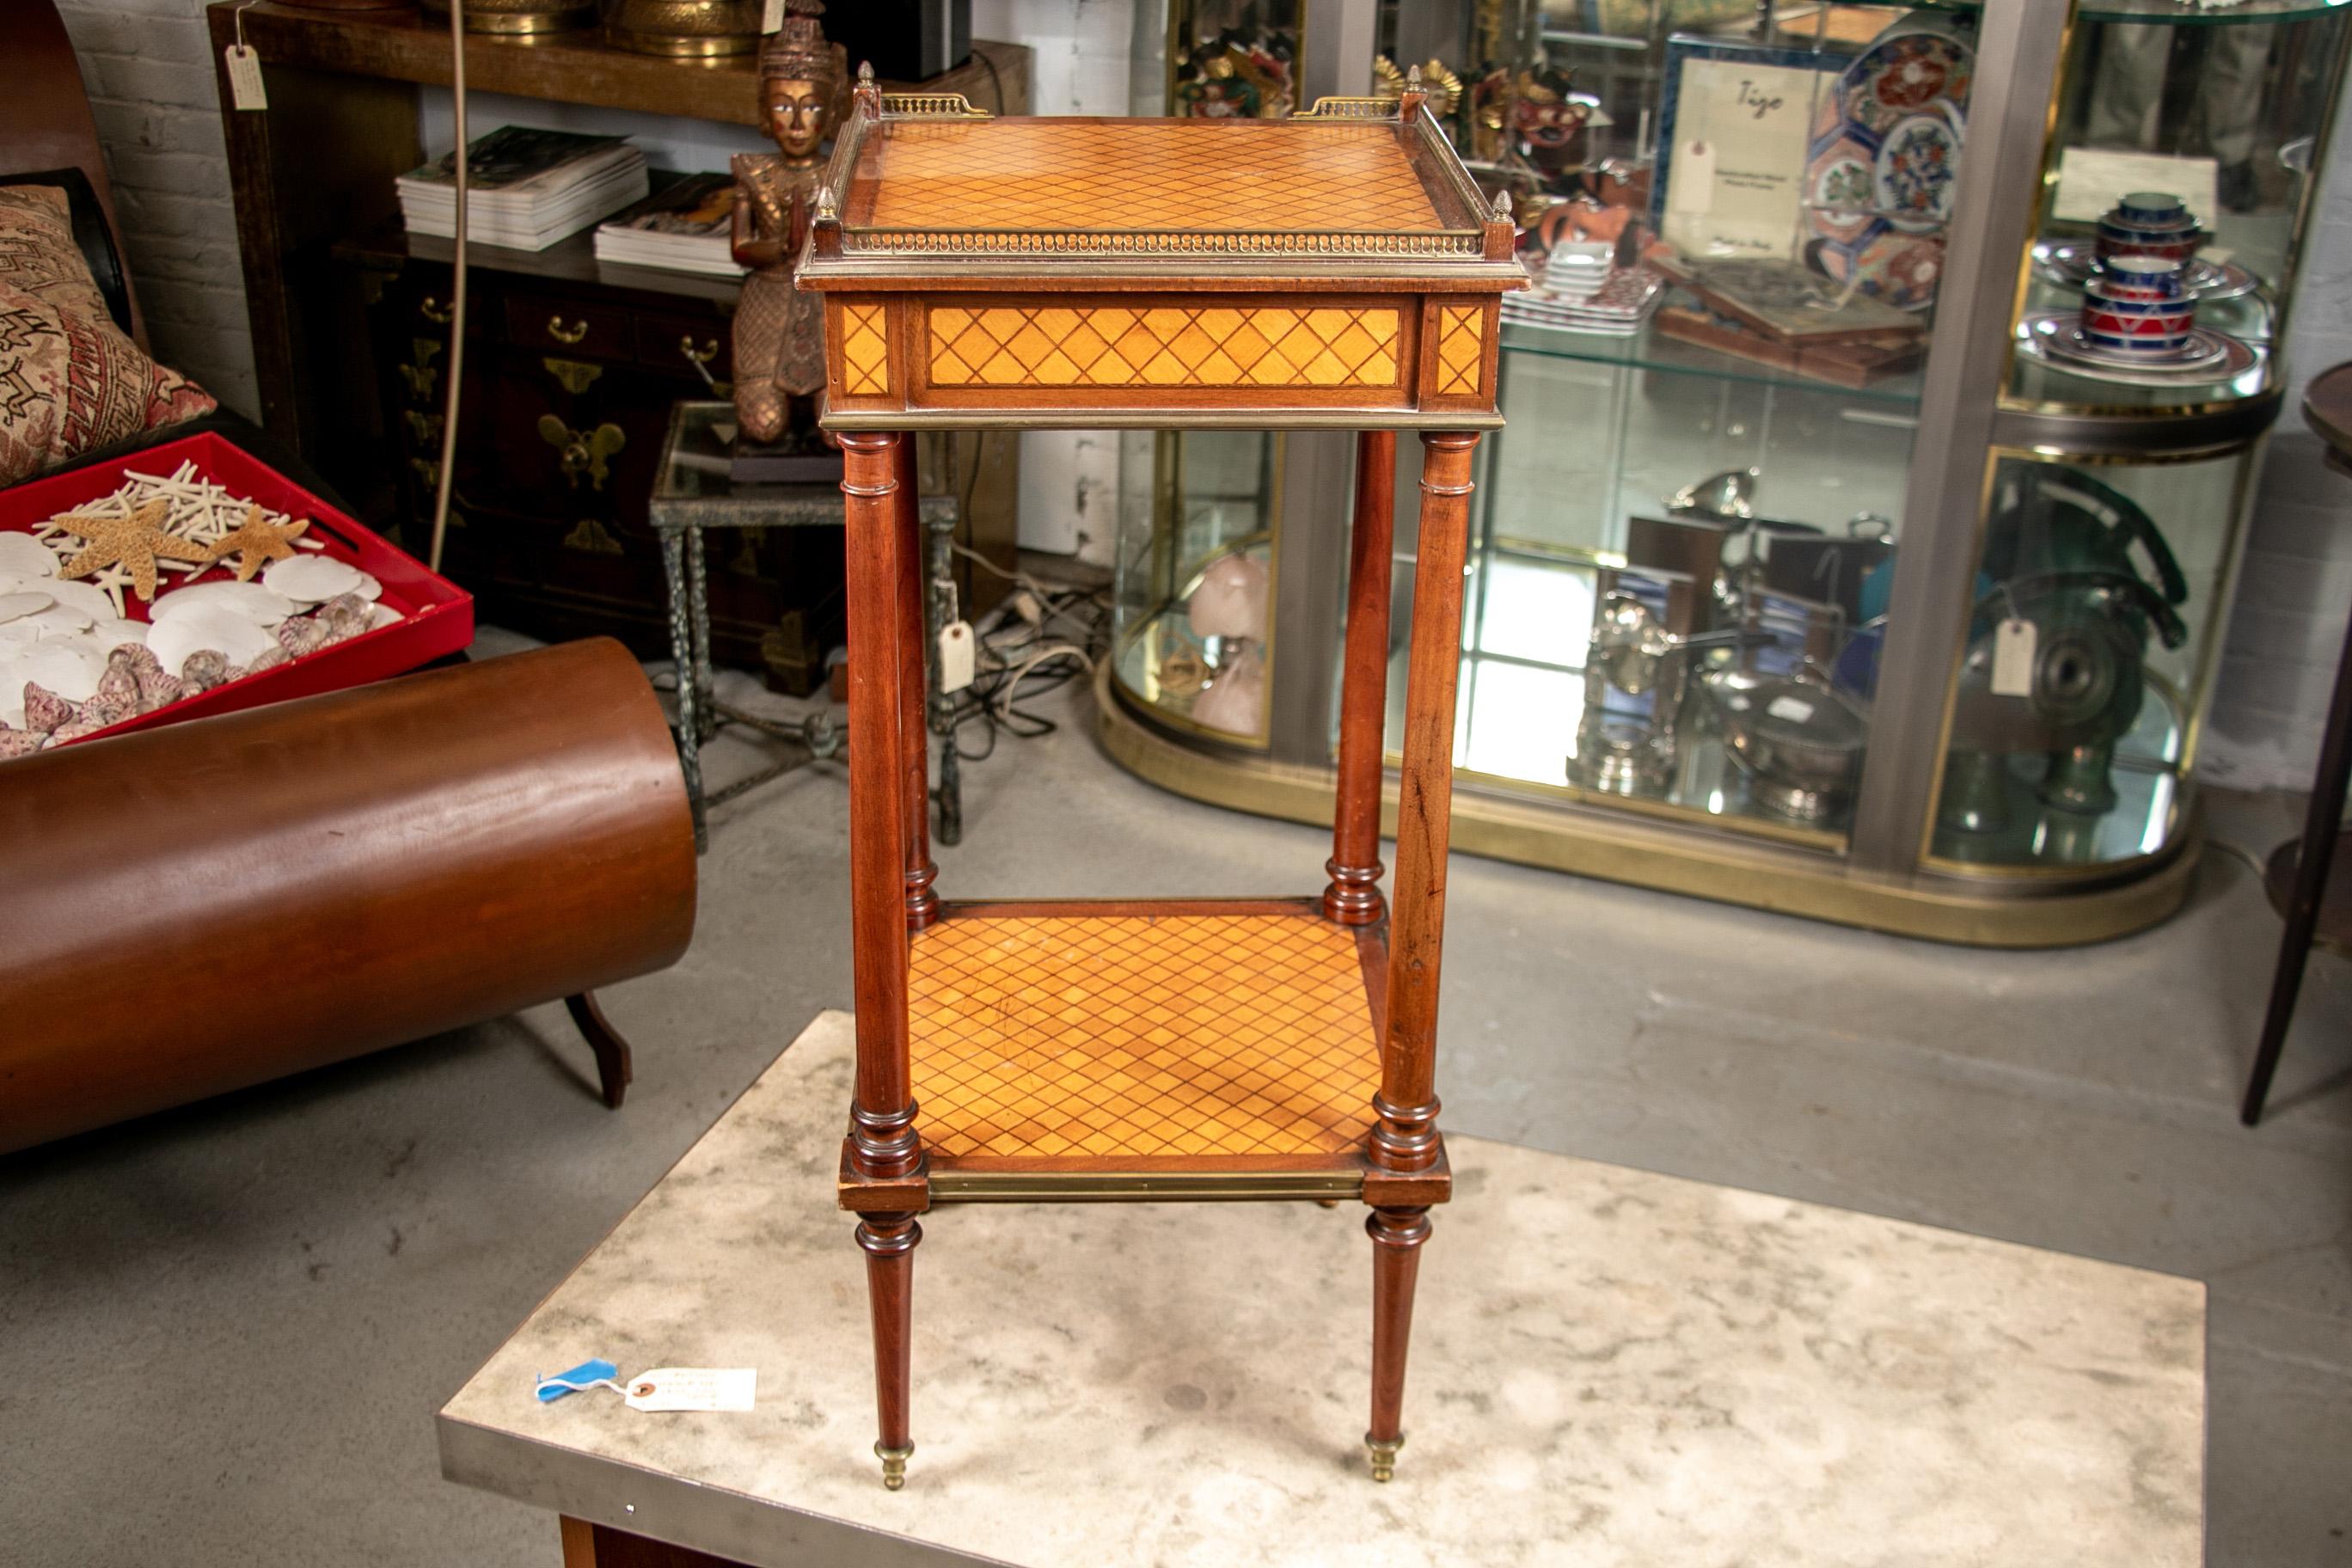 Vintage French tiered parquetry stand, satinwood and mahogany, the tiers with overall diamond patterns, the top with a 3/4 brass gallery. Brass banded frames top and bottom and a single frieze drawer. With turned supports and cylindrical tapering